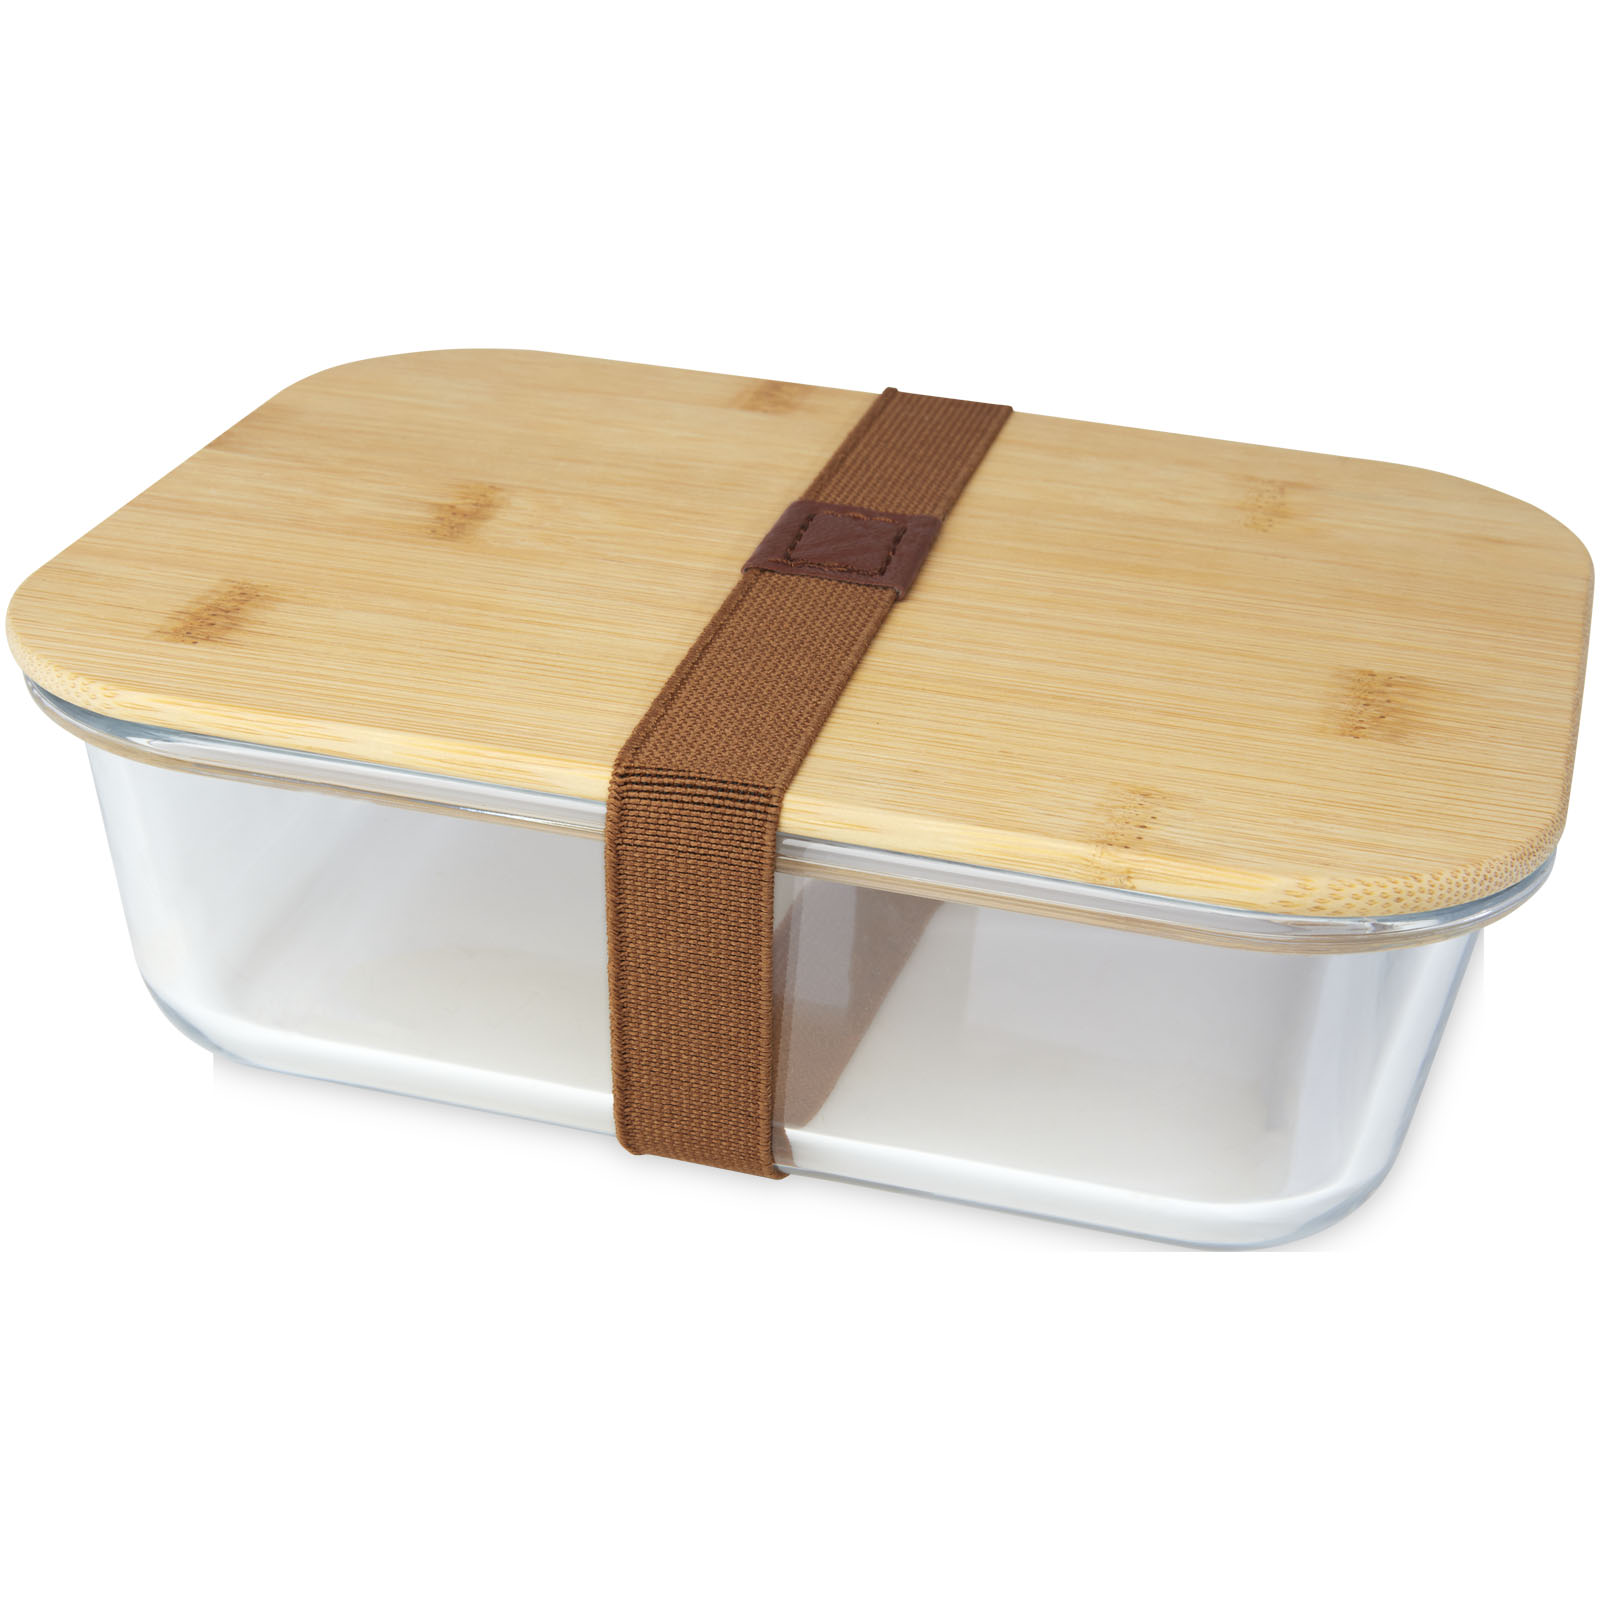 Advertising Lunch Boxes - Roby glass lunch box with bamboo lid